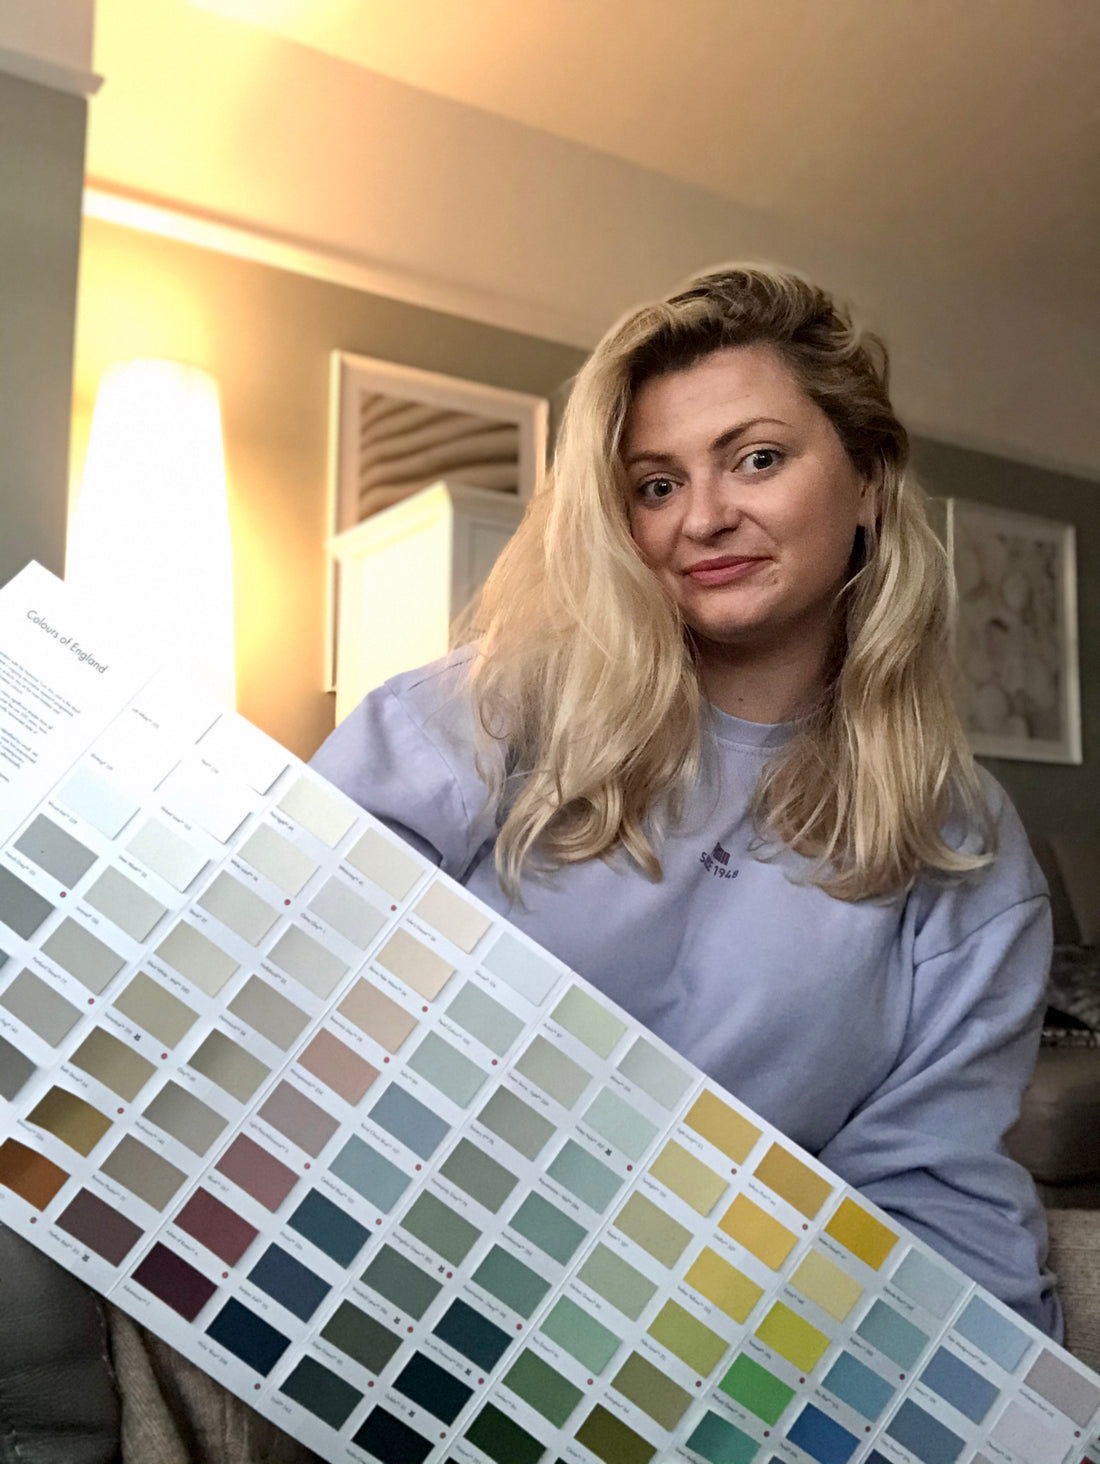 Farrow and Ball’s latest colour release of 11 beautiful shades, 2022